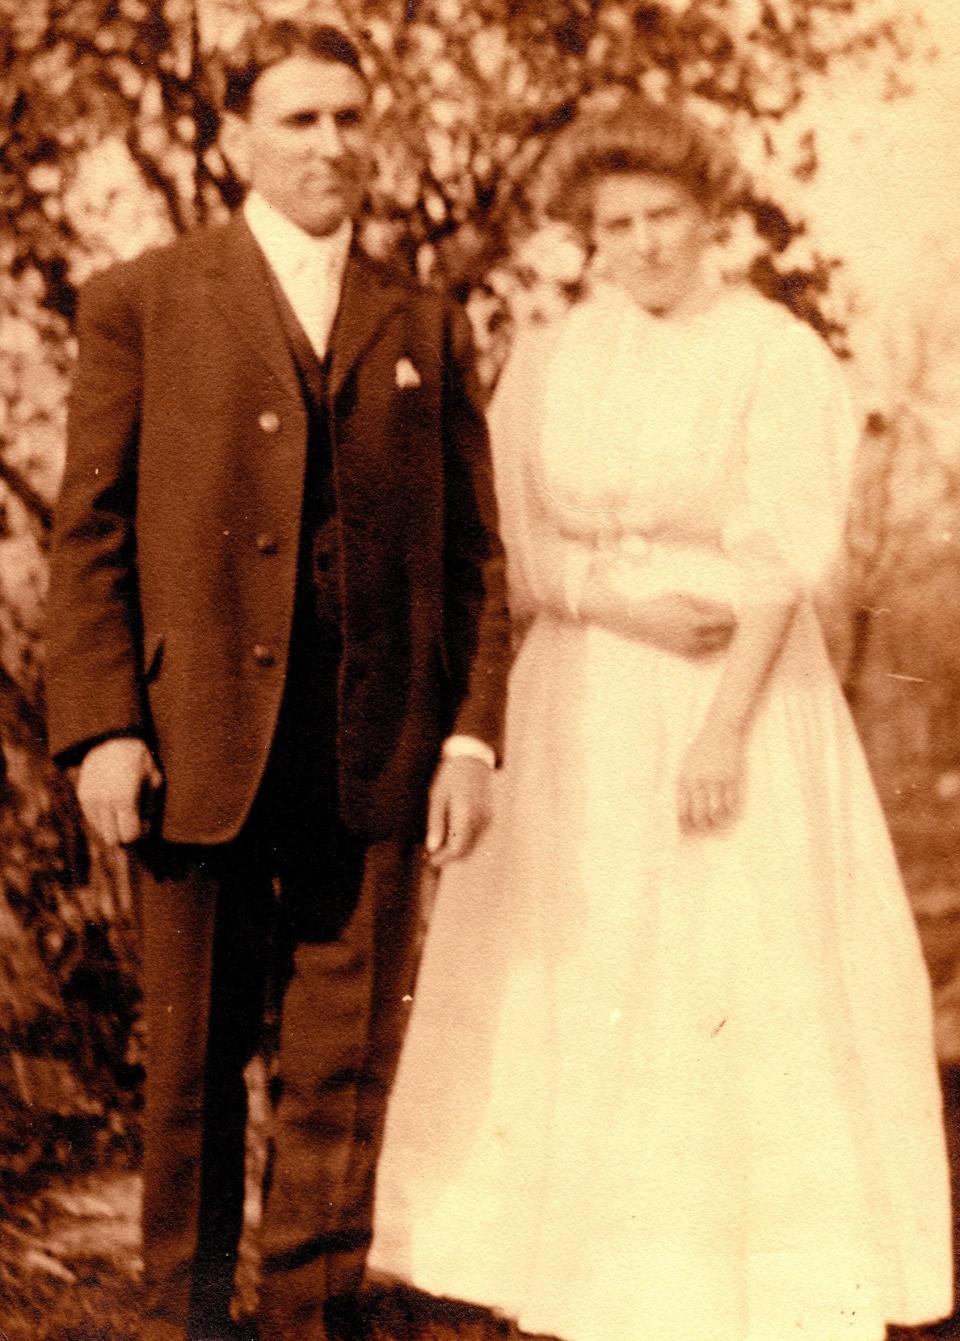 Alfred F. Scheible and Dorothea Pfau on their wedding day circa 1900 in New York state.